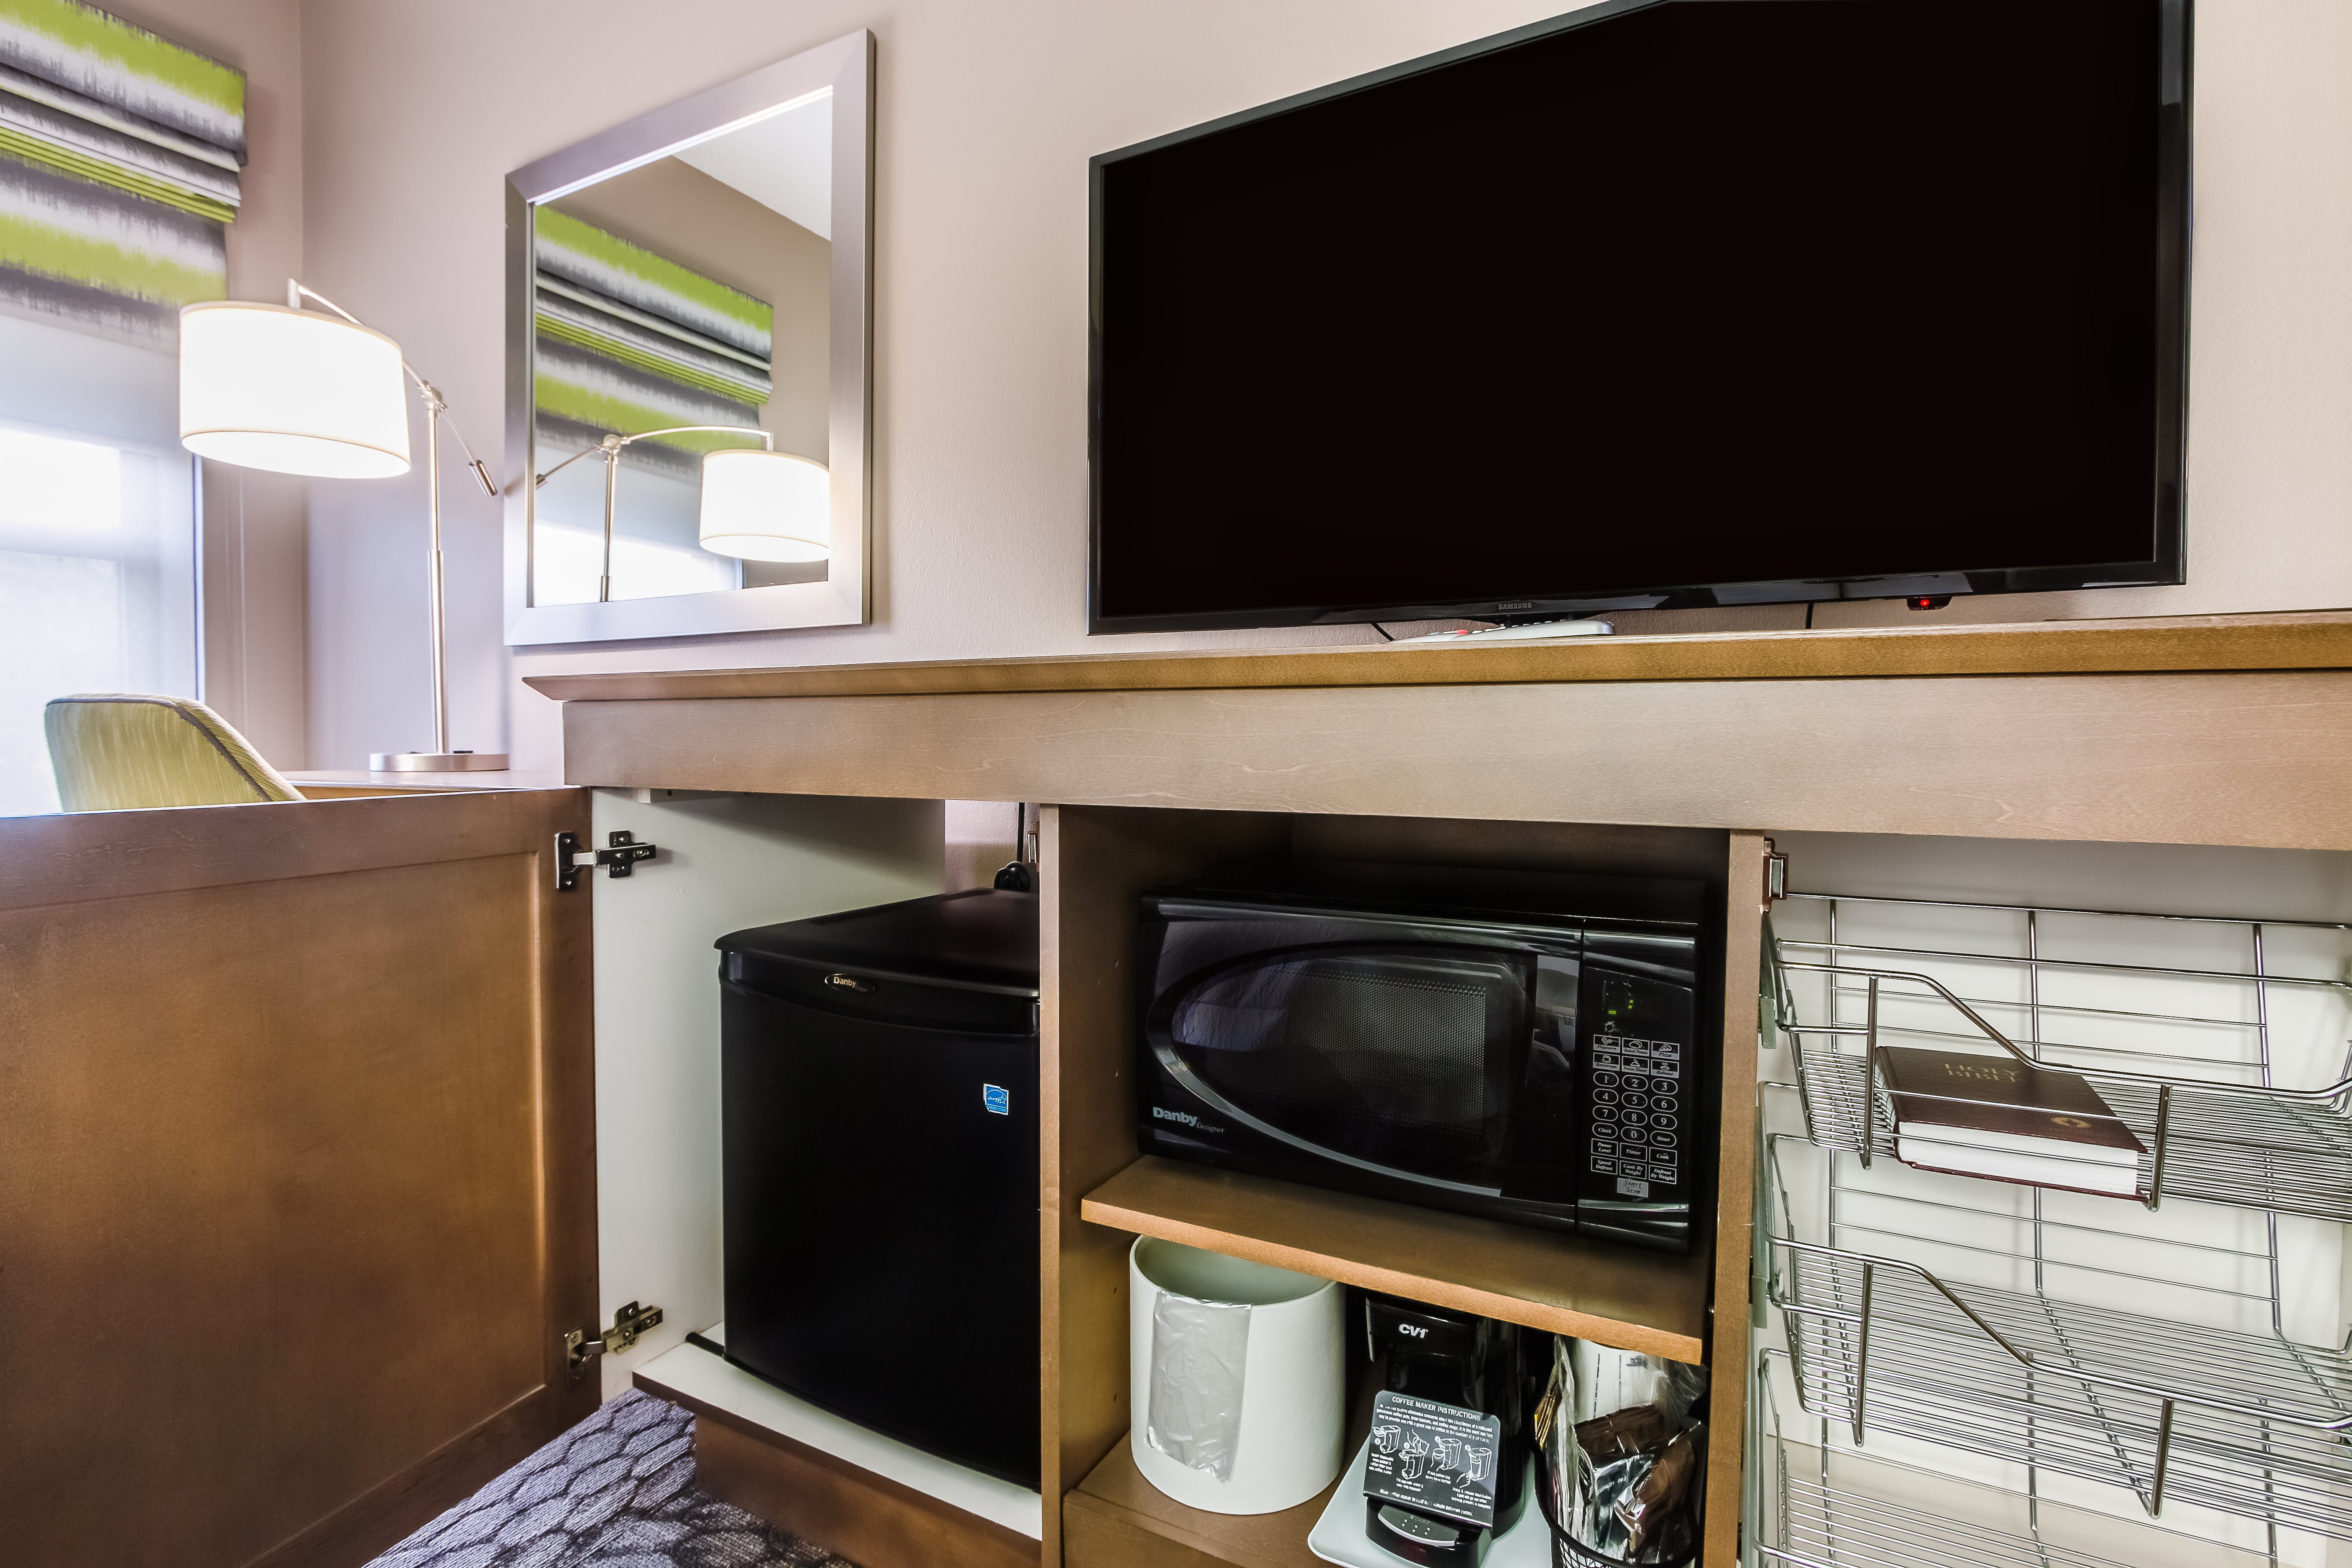 Room Amenities and Technology